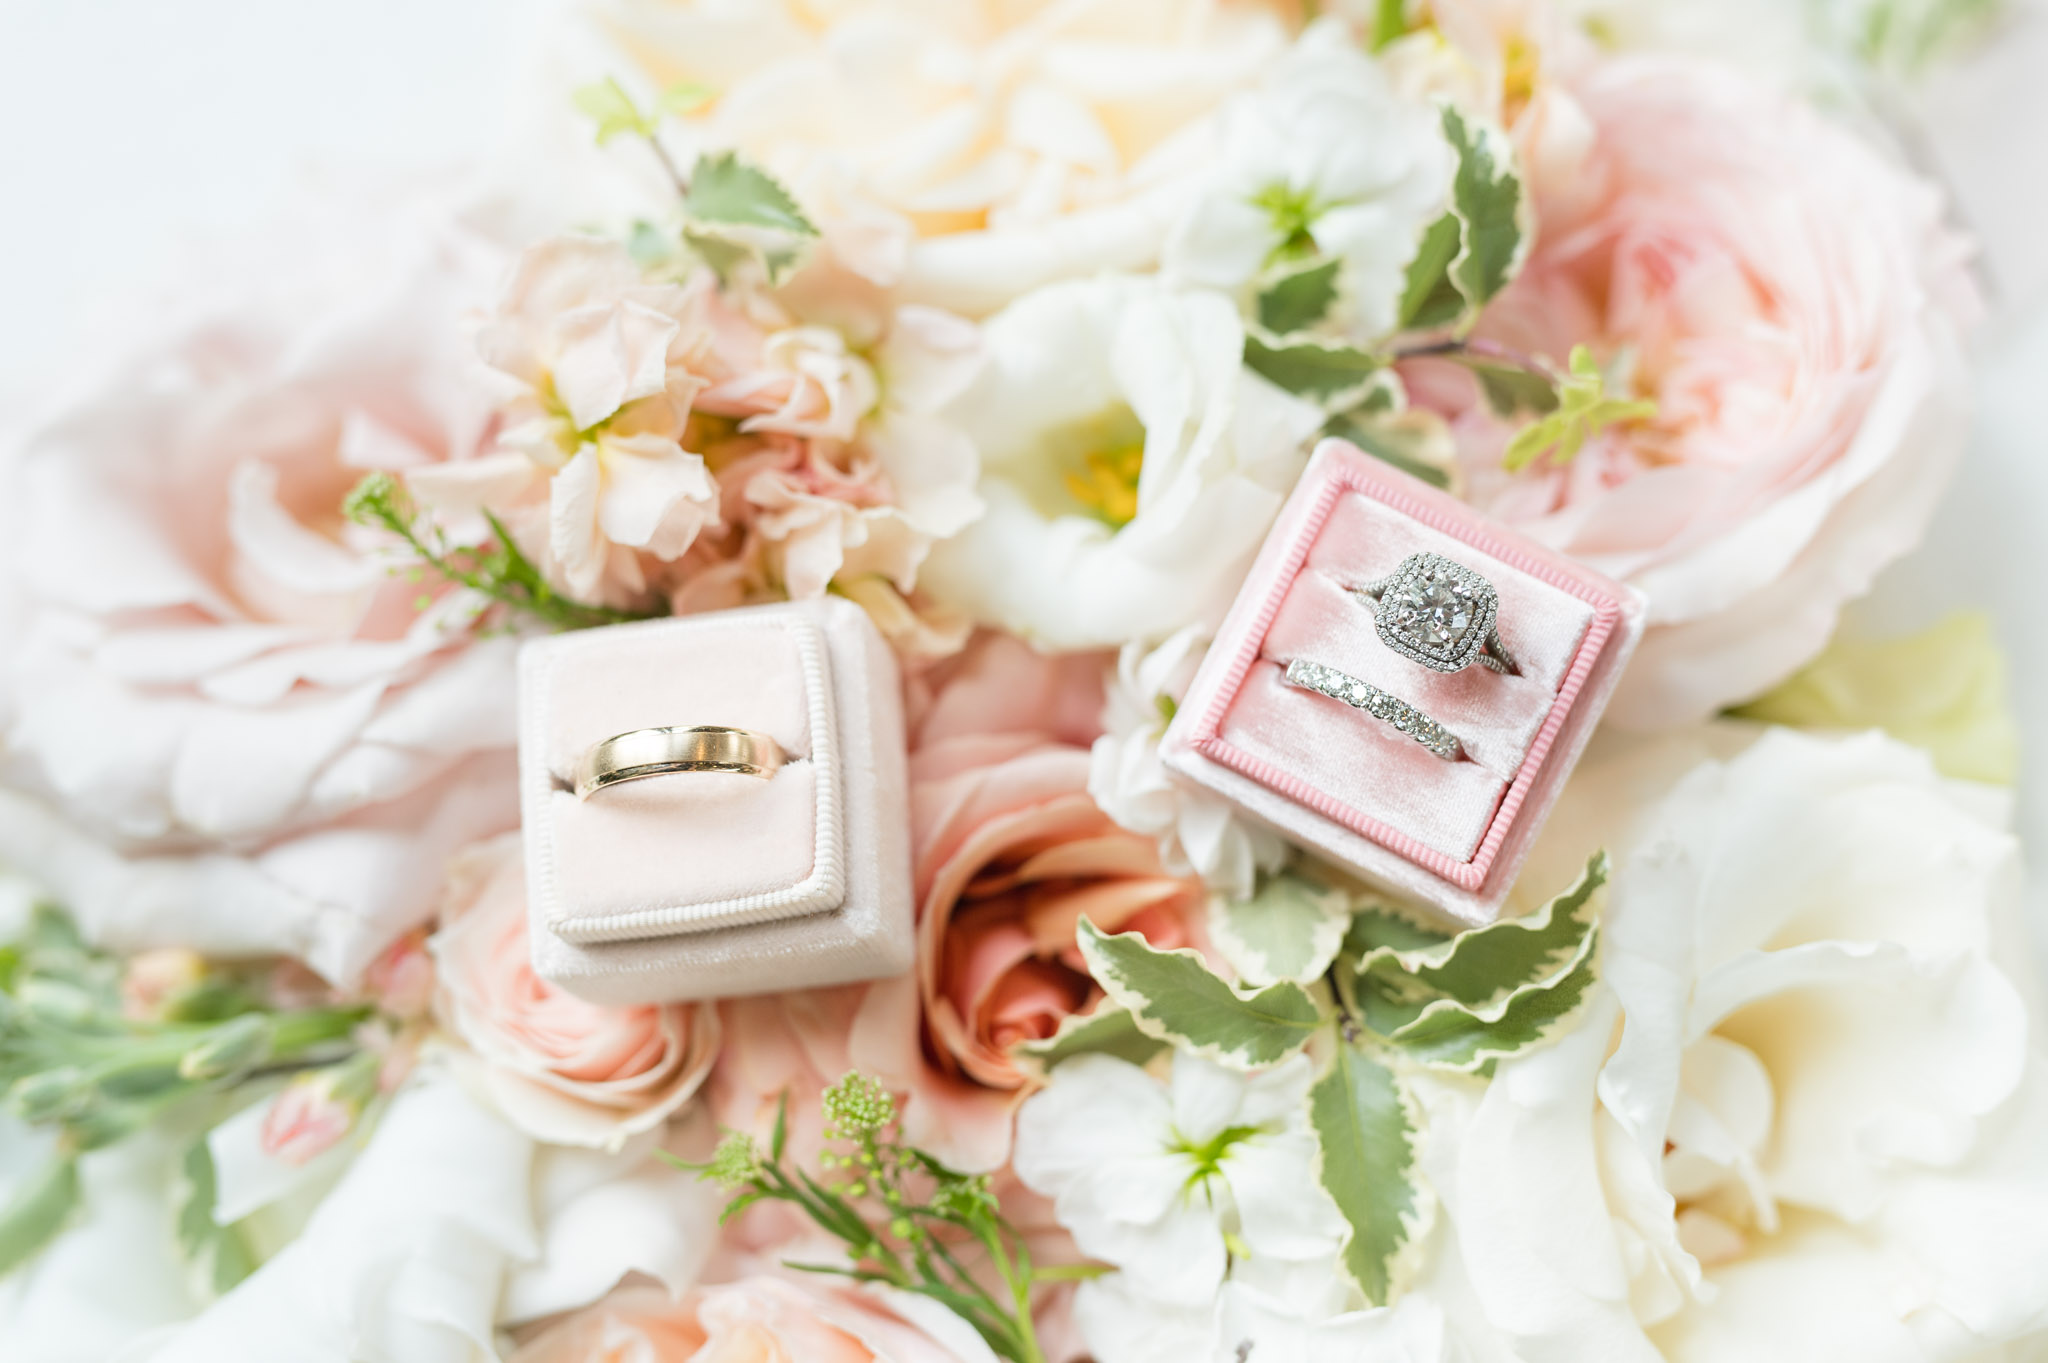 Wedding rings sit in ring boxes on flowers.